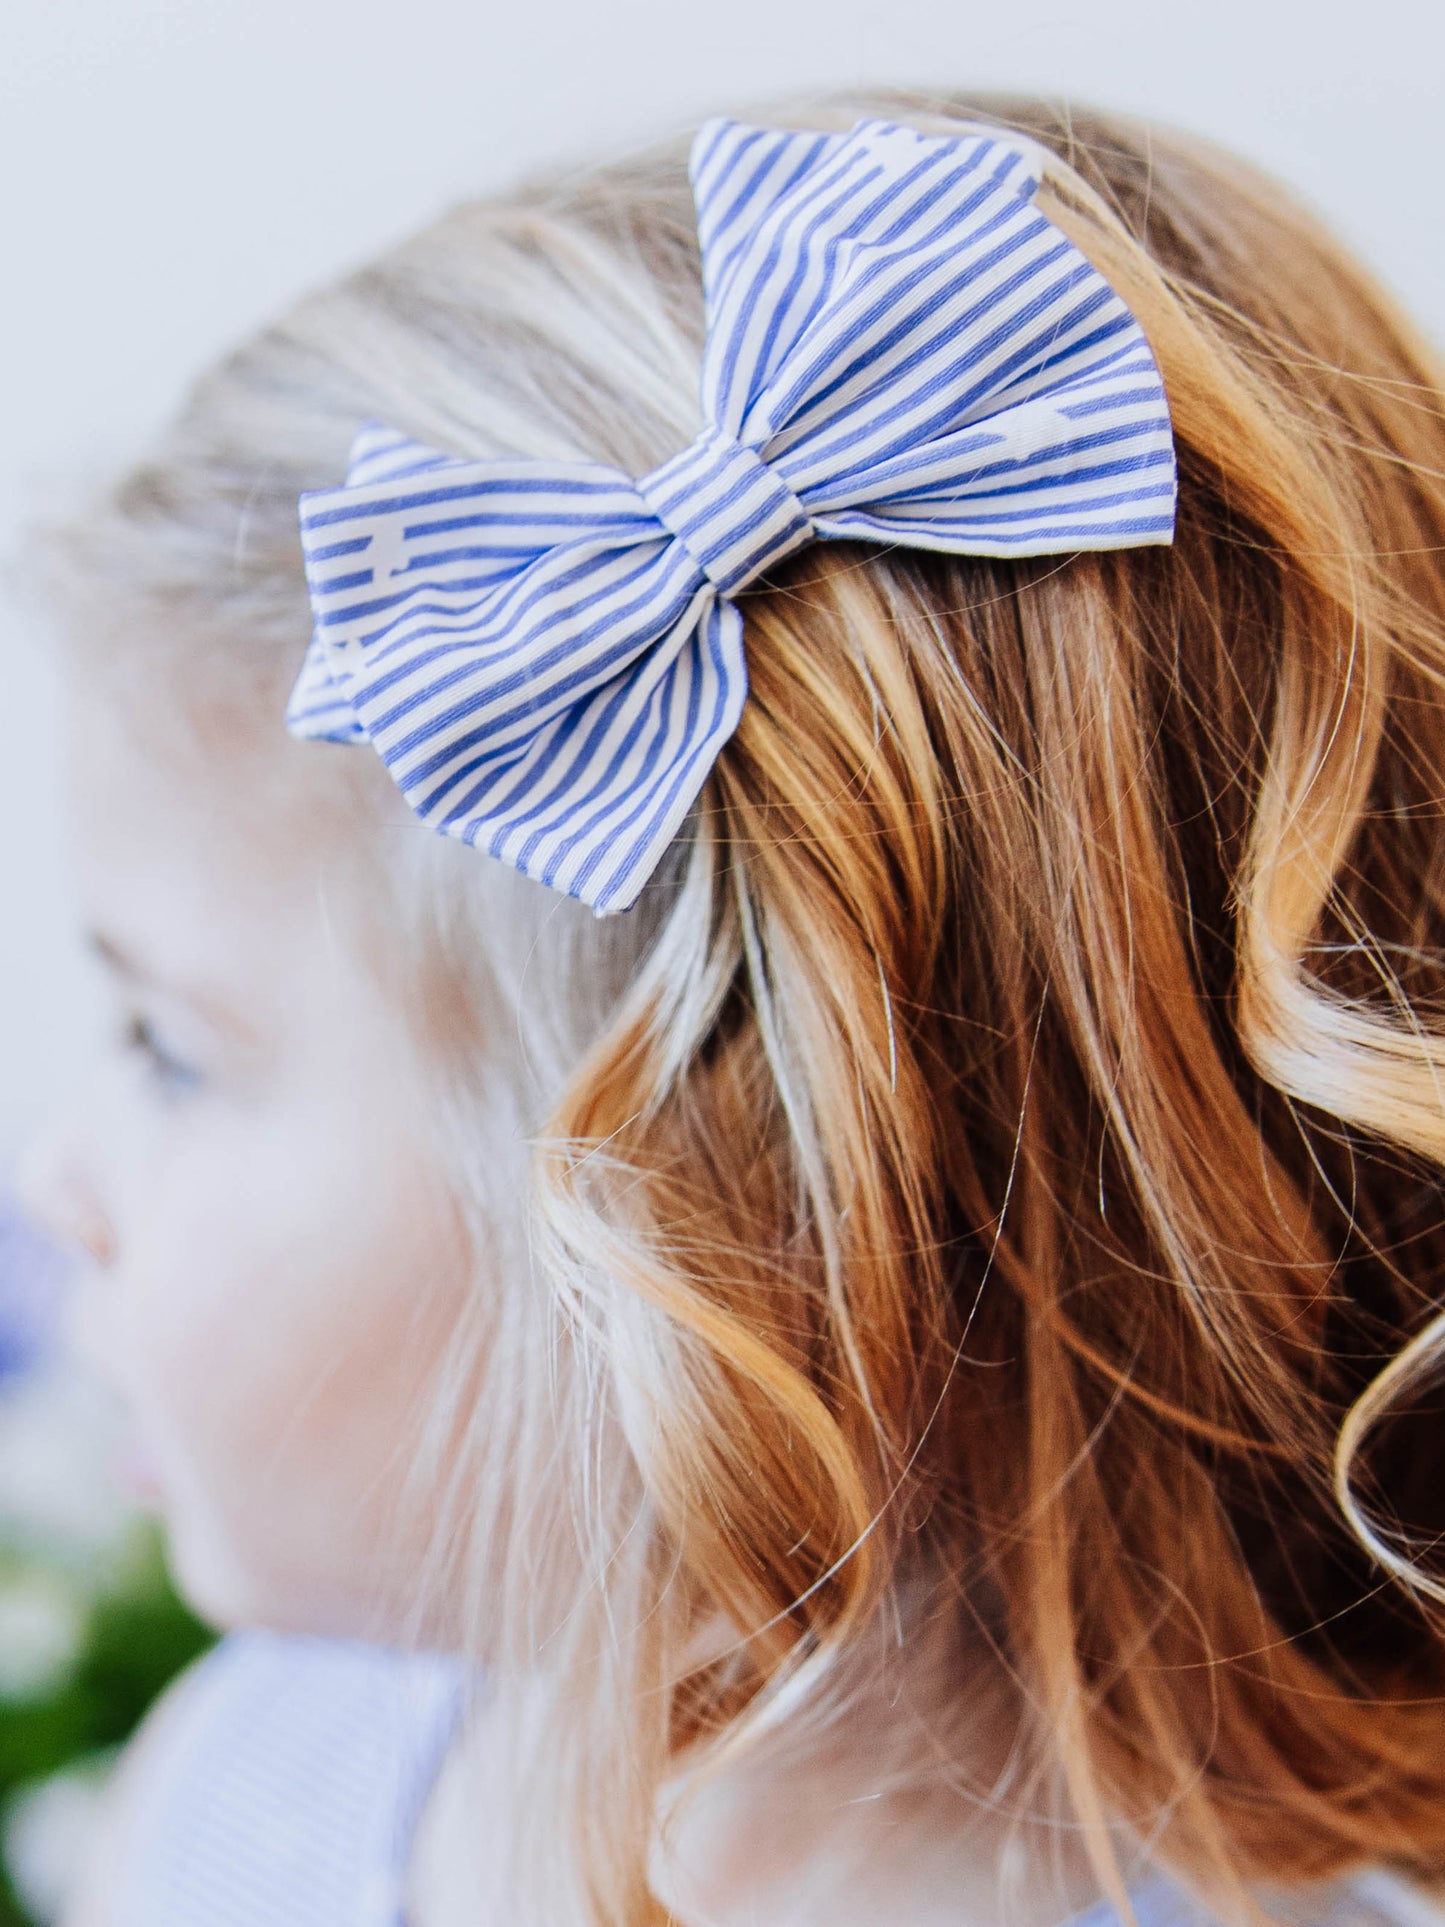 Bow Set Duo - Starry Stripes